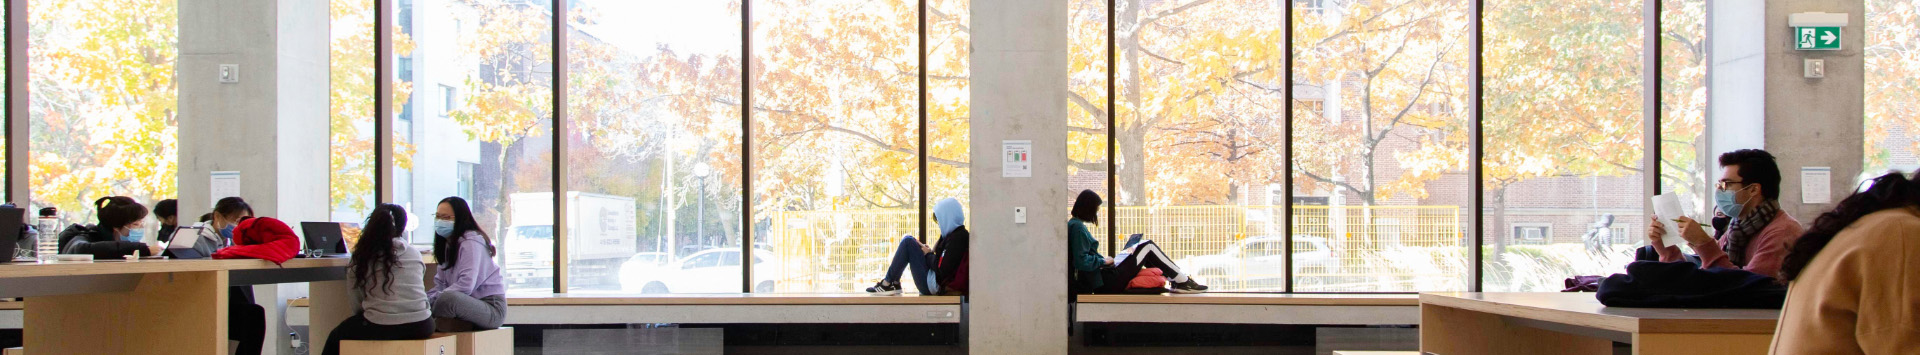 Students studying in a building with large windows